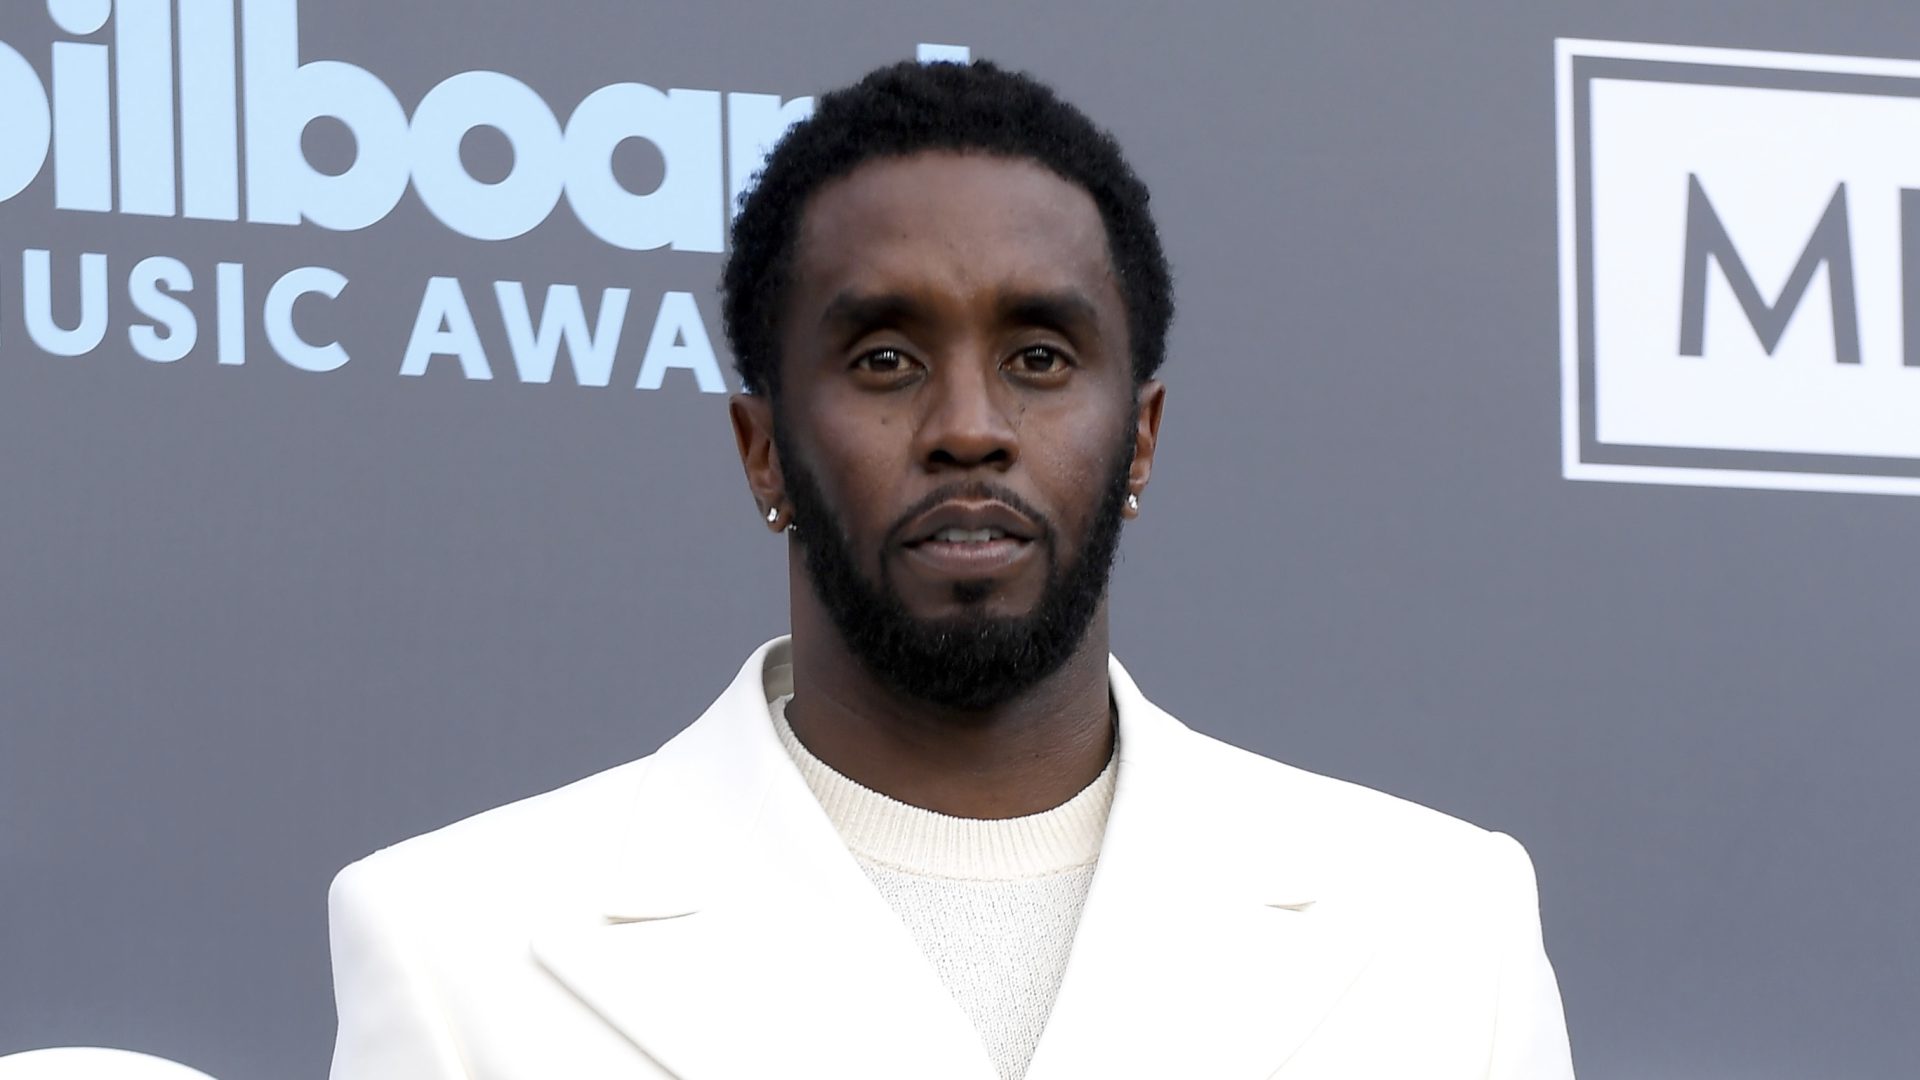 Diddy’s Lawyer Speaks Out After He’s Accused Of Sexual Assault & Harassment By Former Male Employee thumbnail